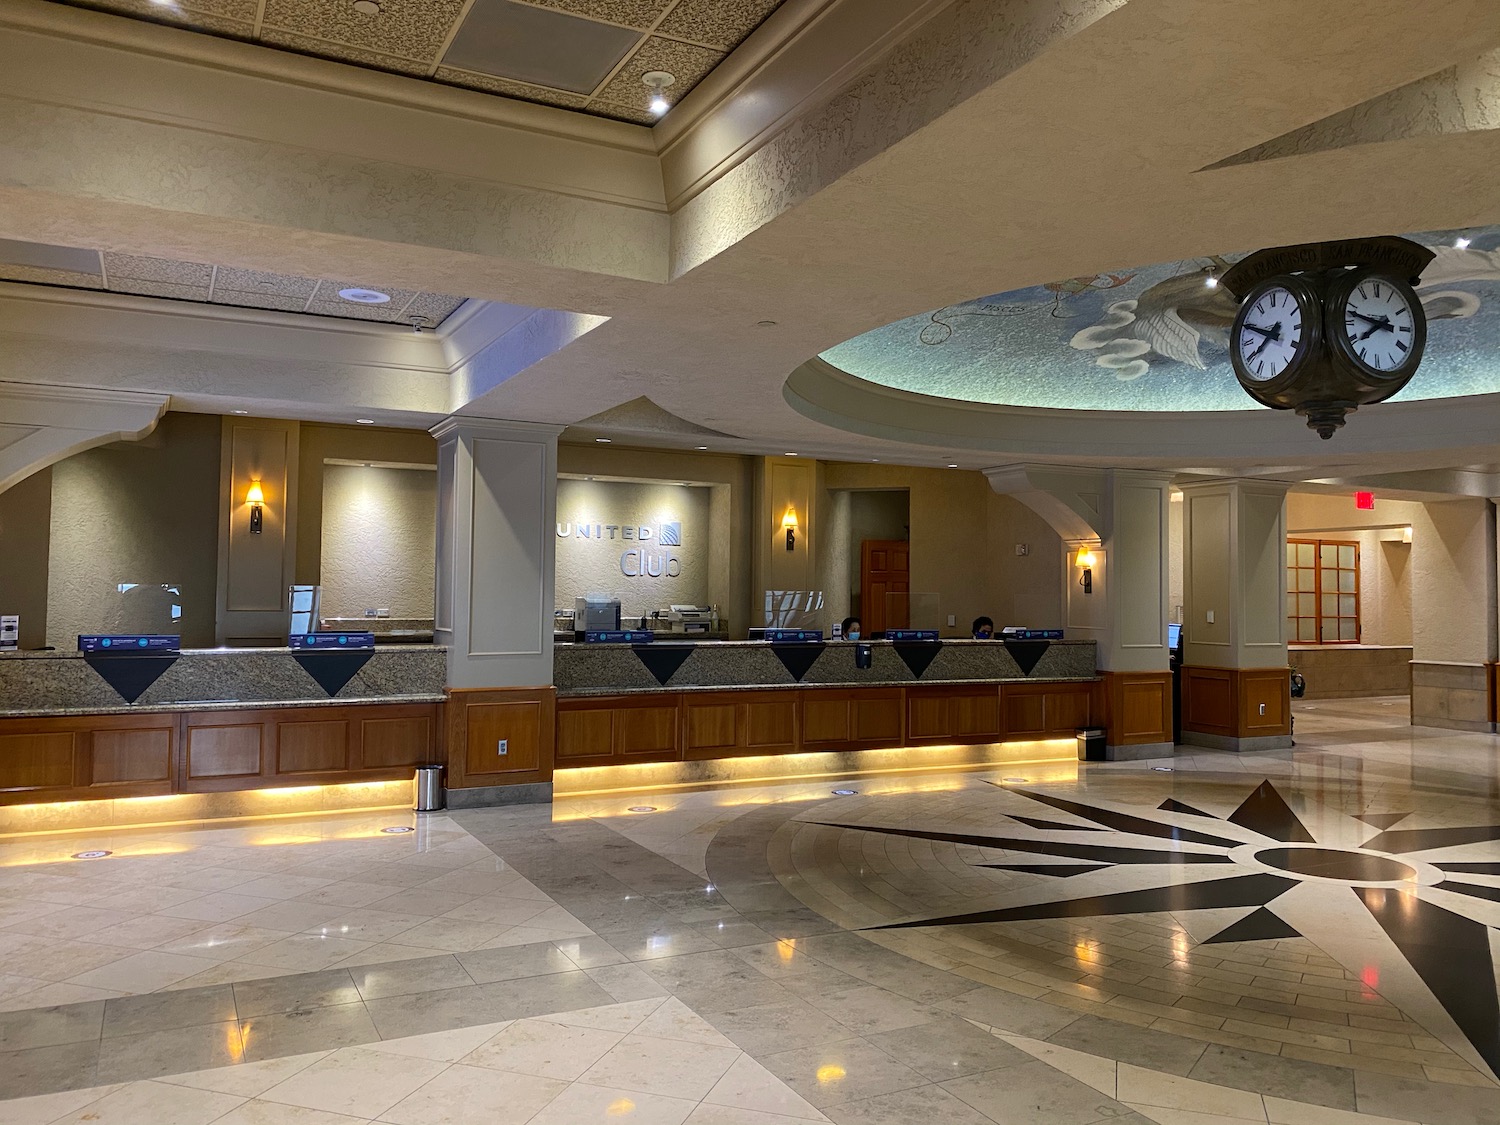 a large lobby with a clock and counter